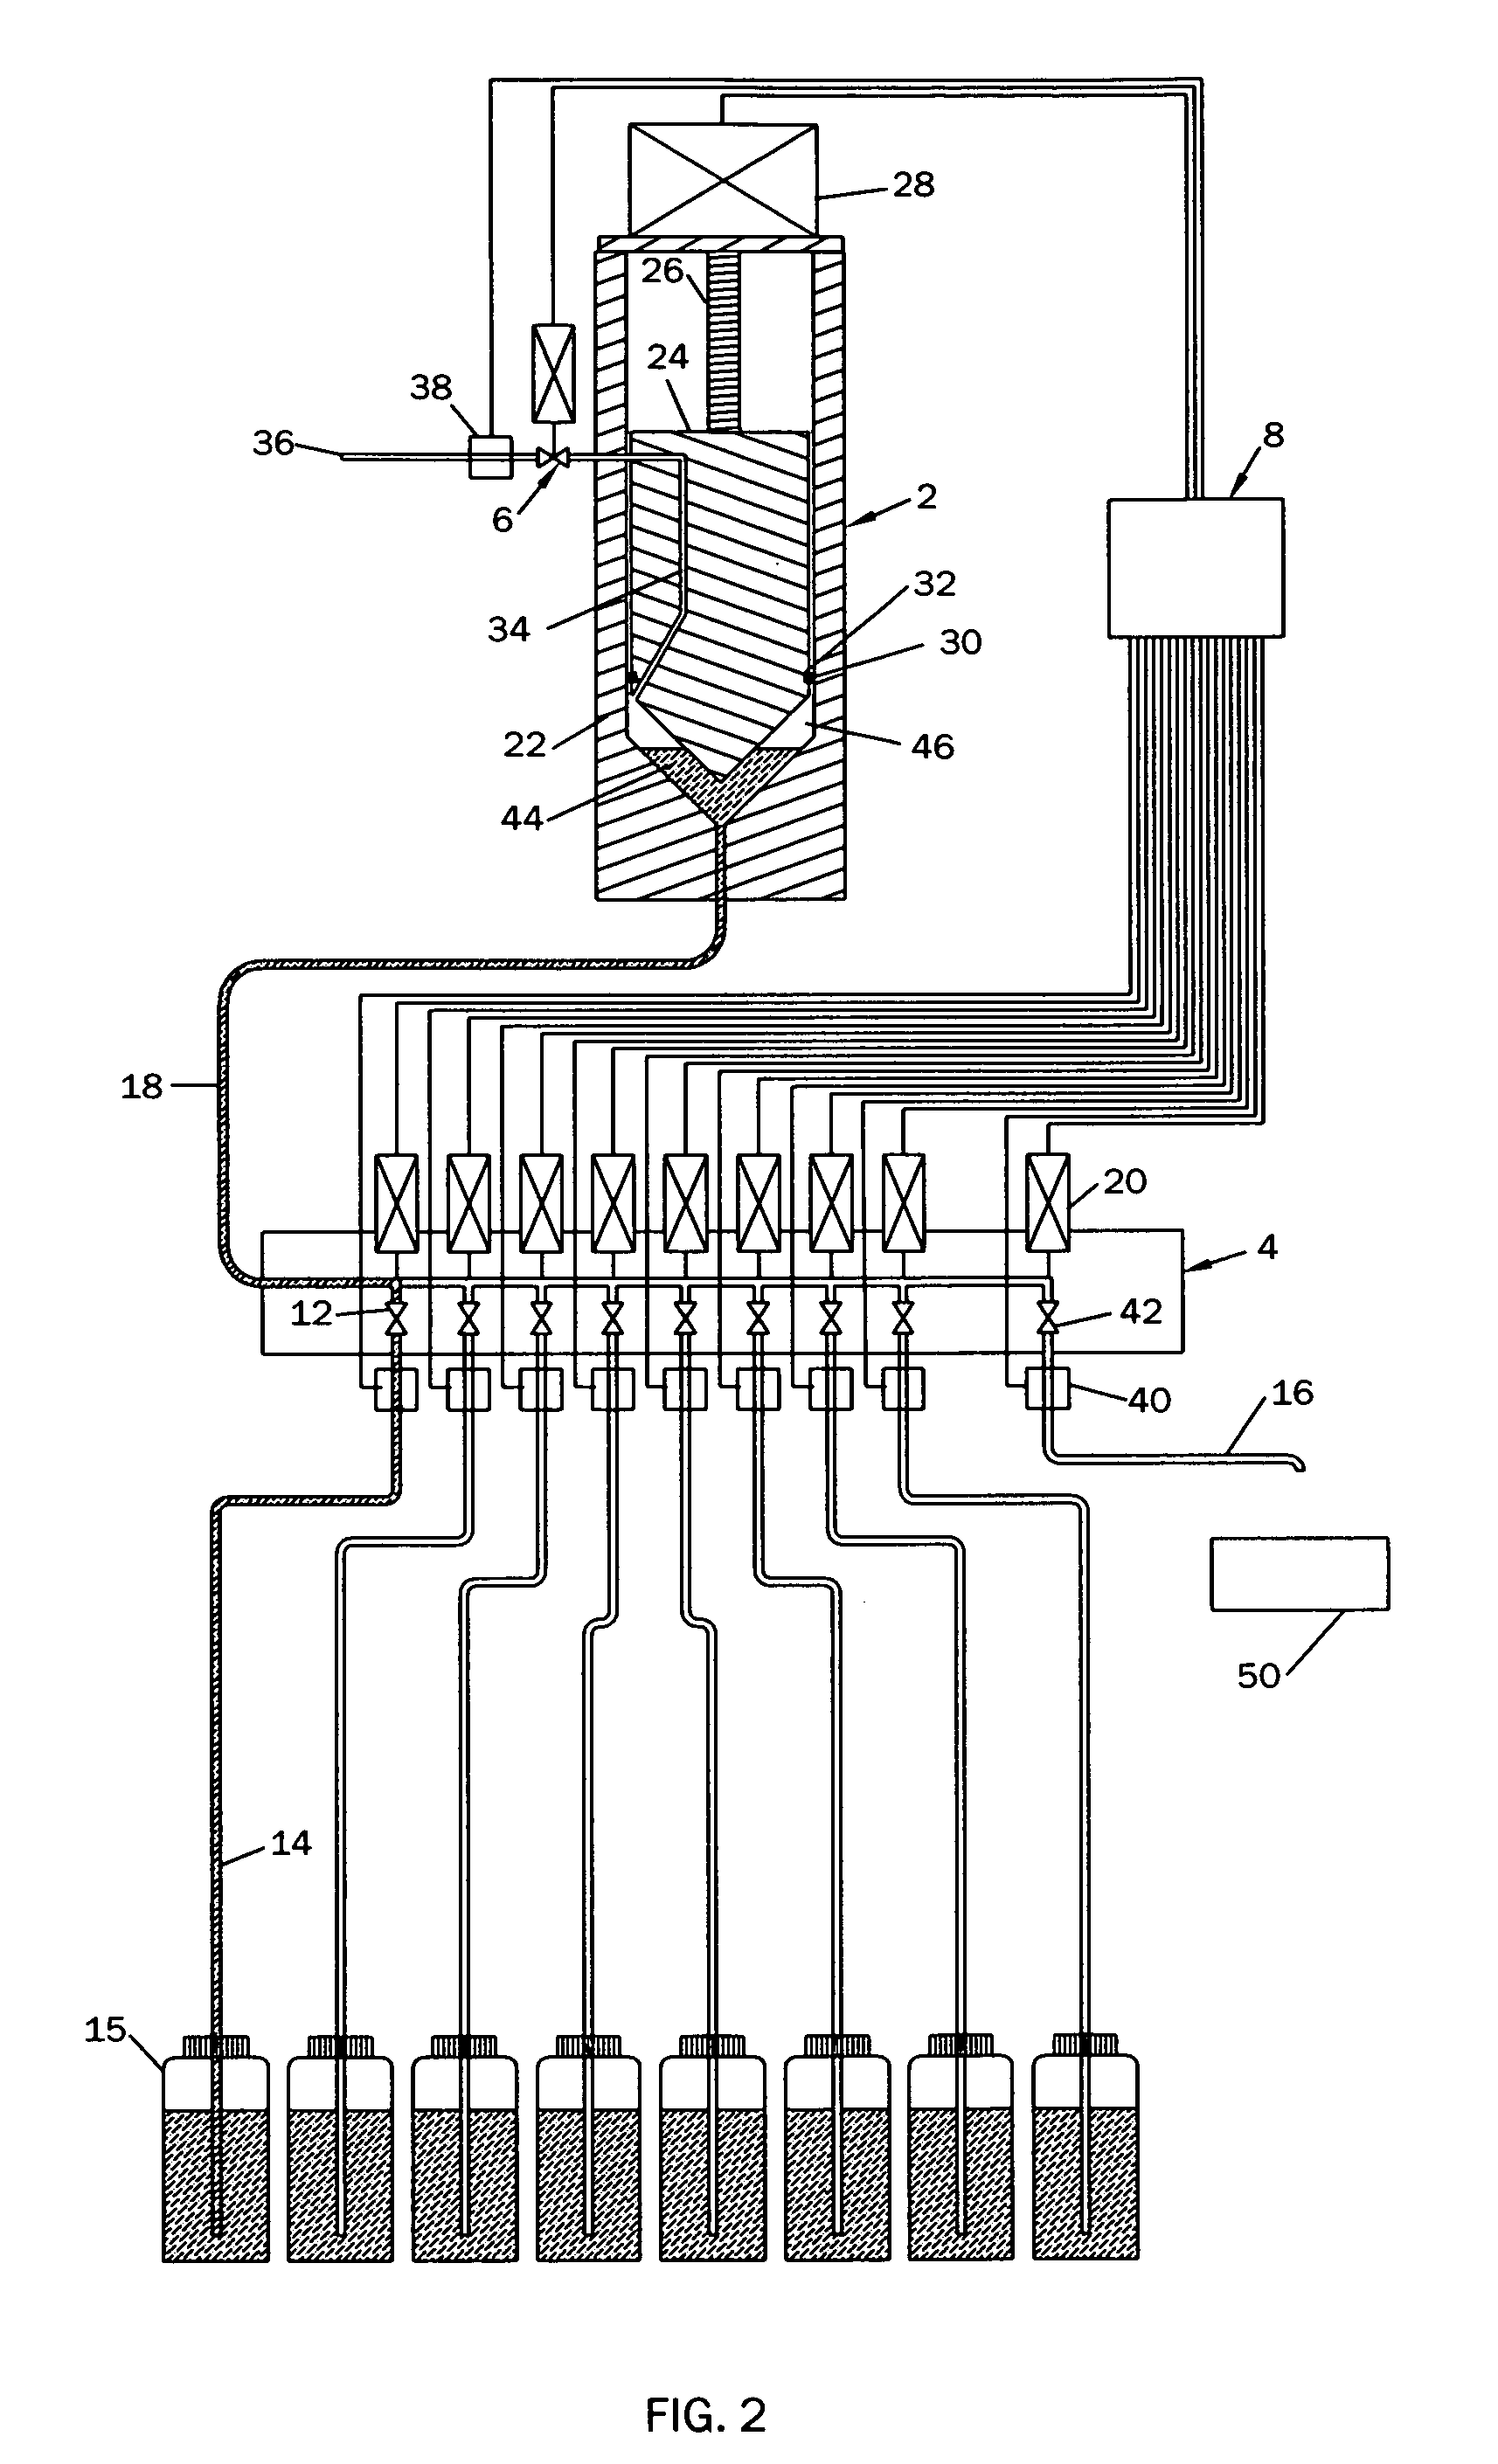 Device and method for the volumetric measurement and dispensing of liquids